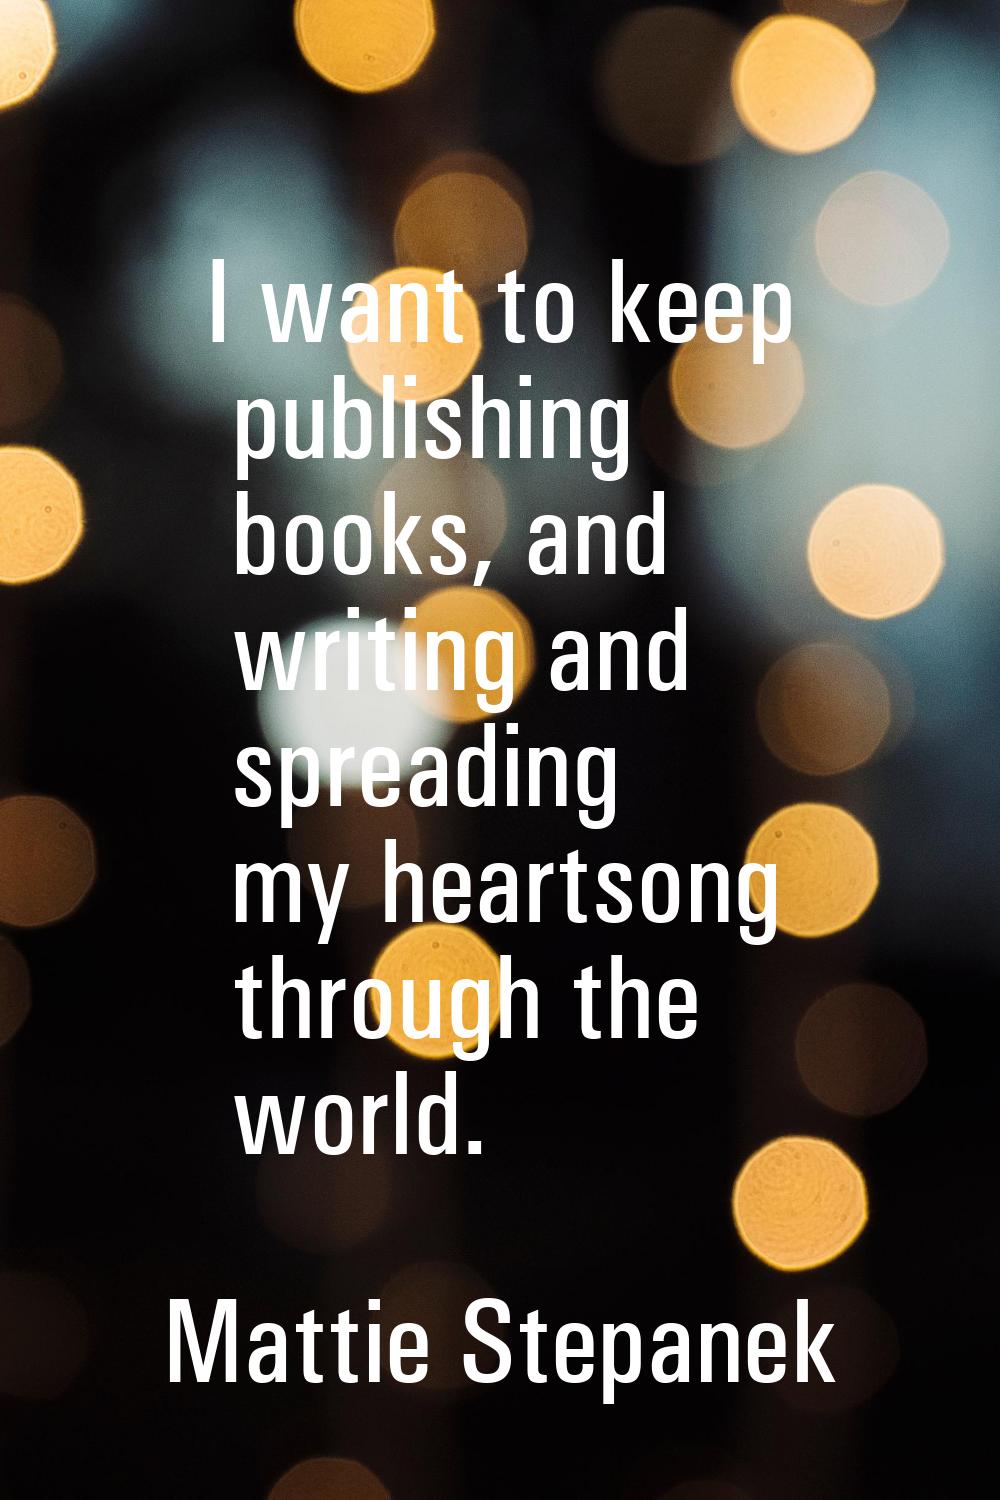 I want to keep publishing books, and writing and spreading my heartsong through the world.